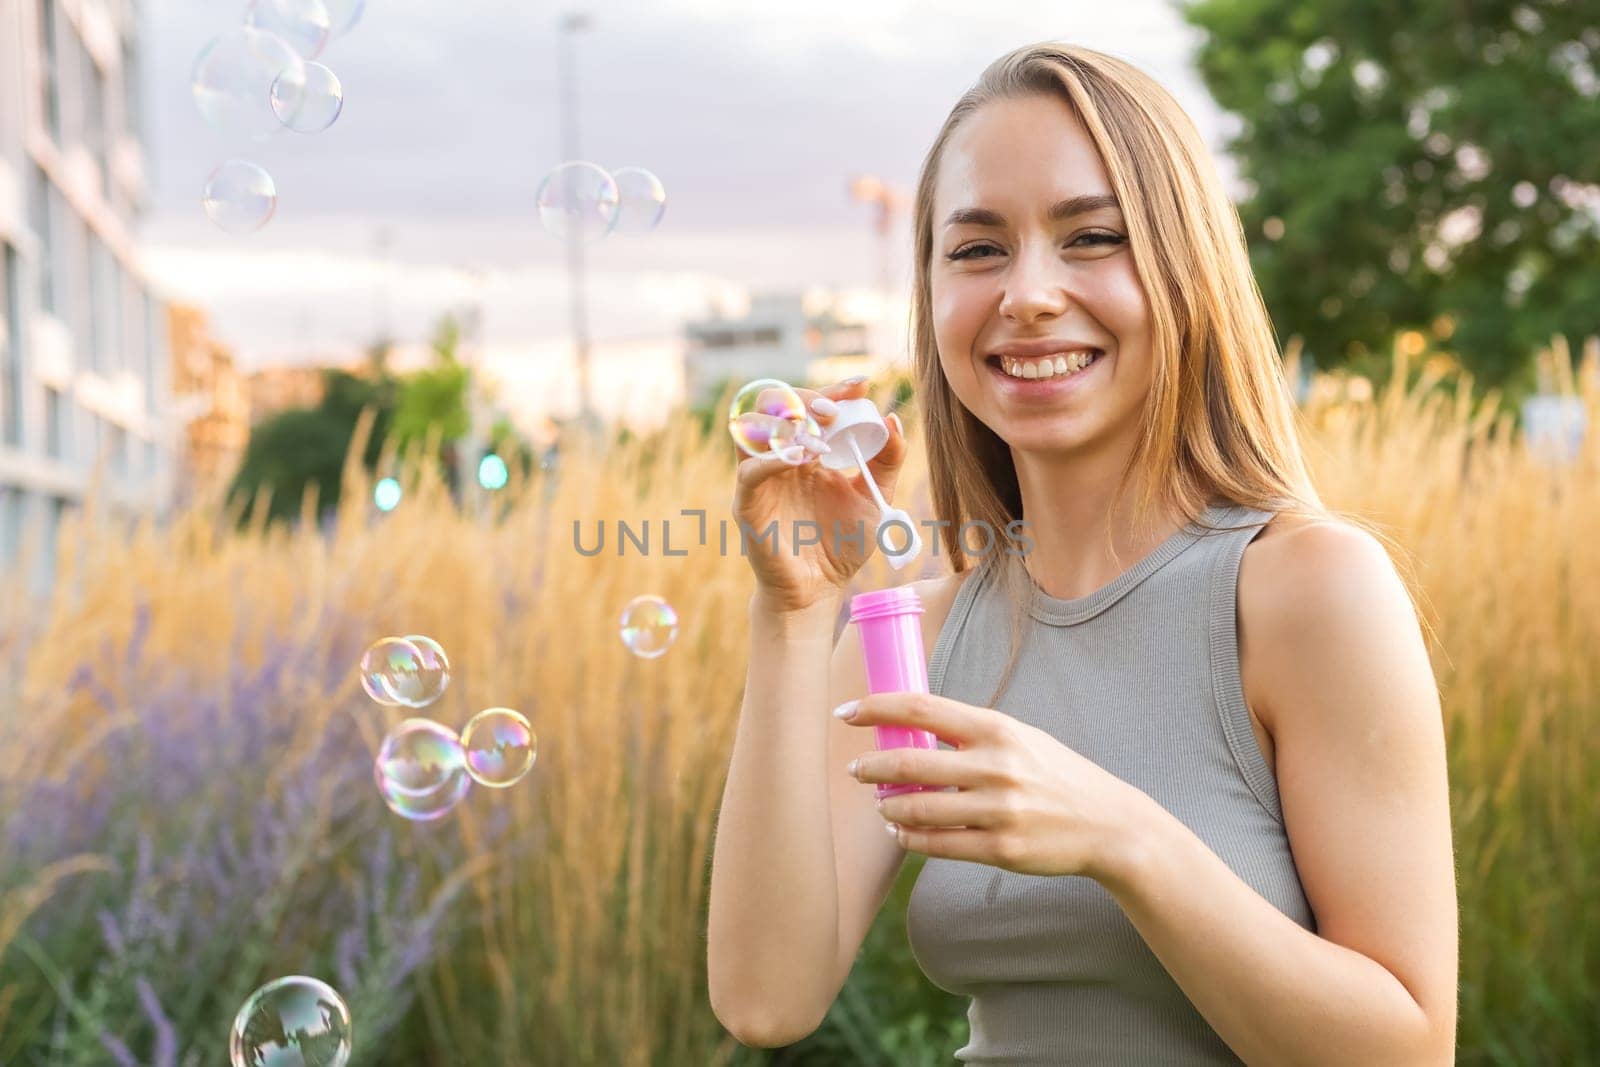 A joyous lady with long, flowing hair creates soap bubbles and smiles in the park.